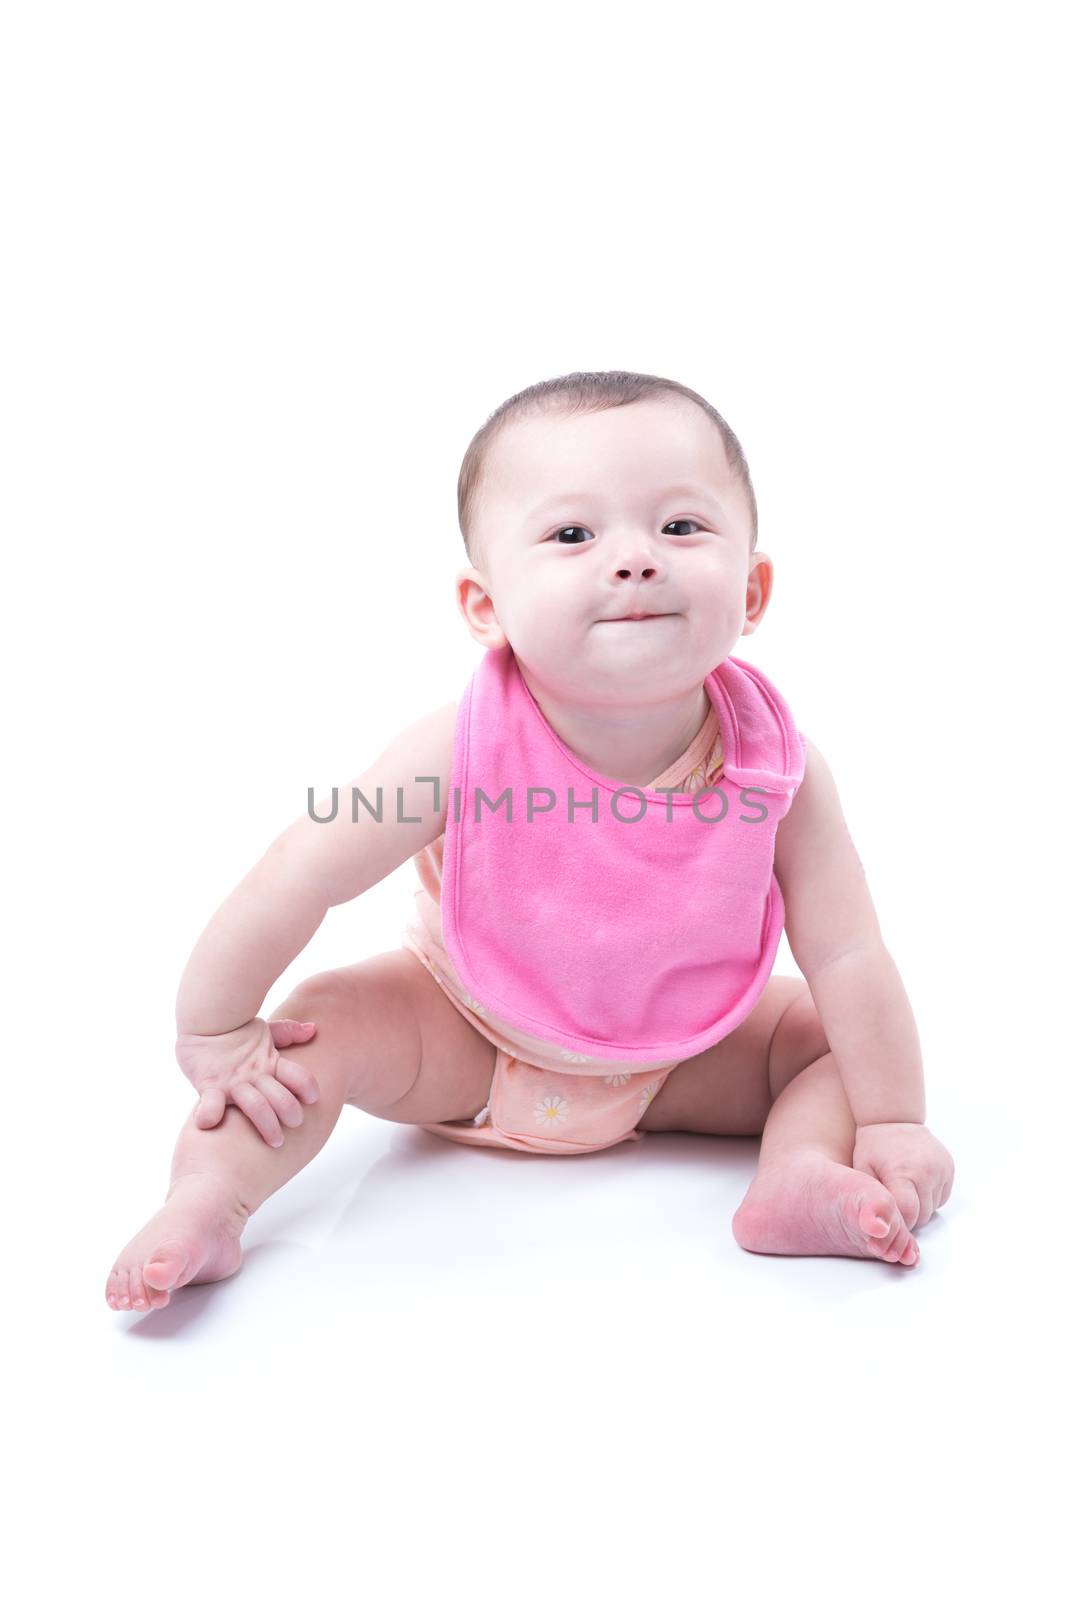 A cute 1 year old girl wearing a pink bib sitting on white.